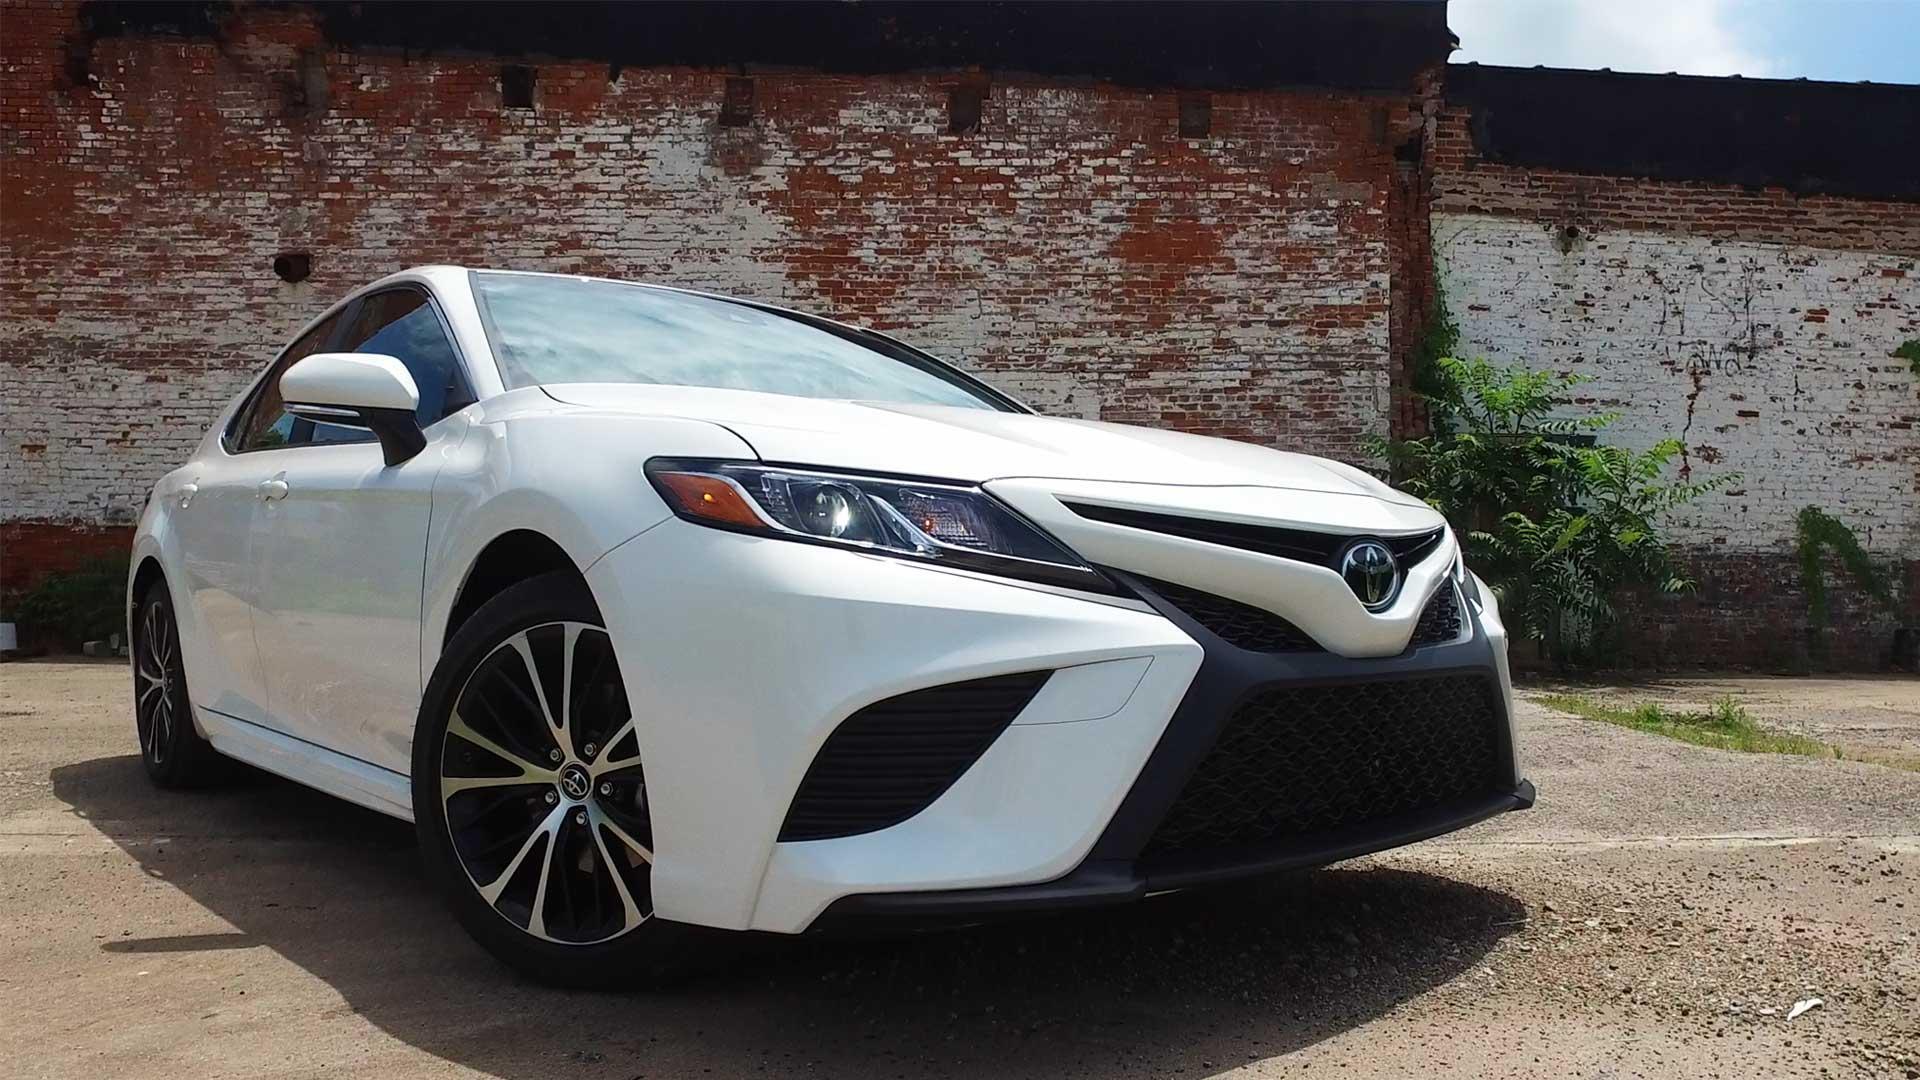 2018 Toyota Camry Hybrid Review - Consumer Reports